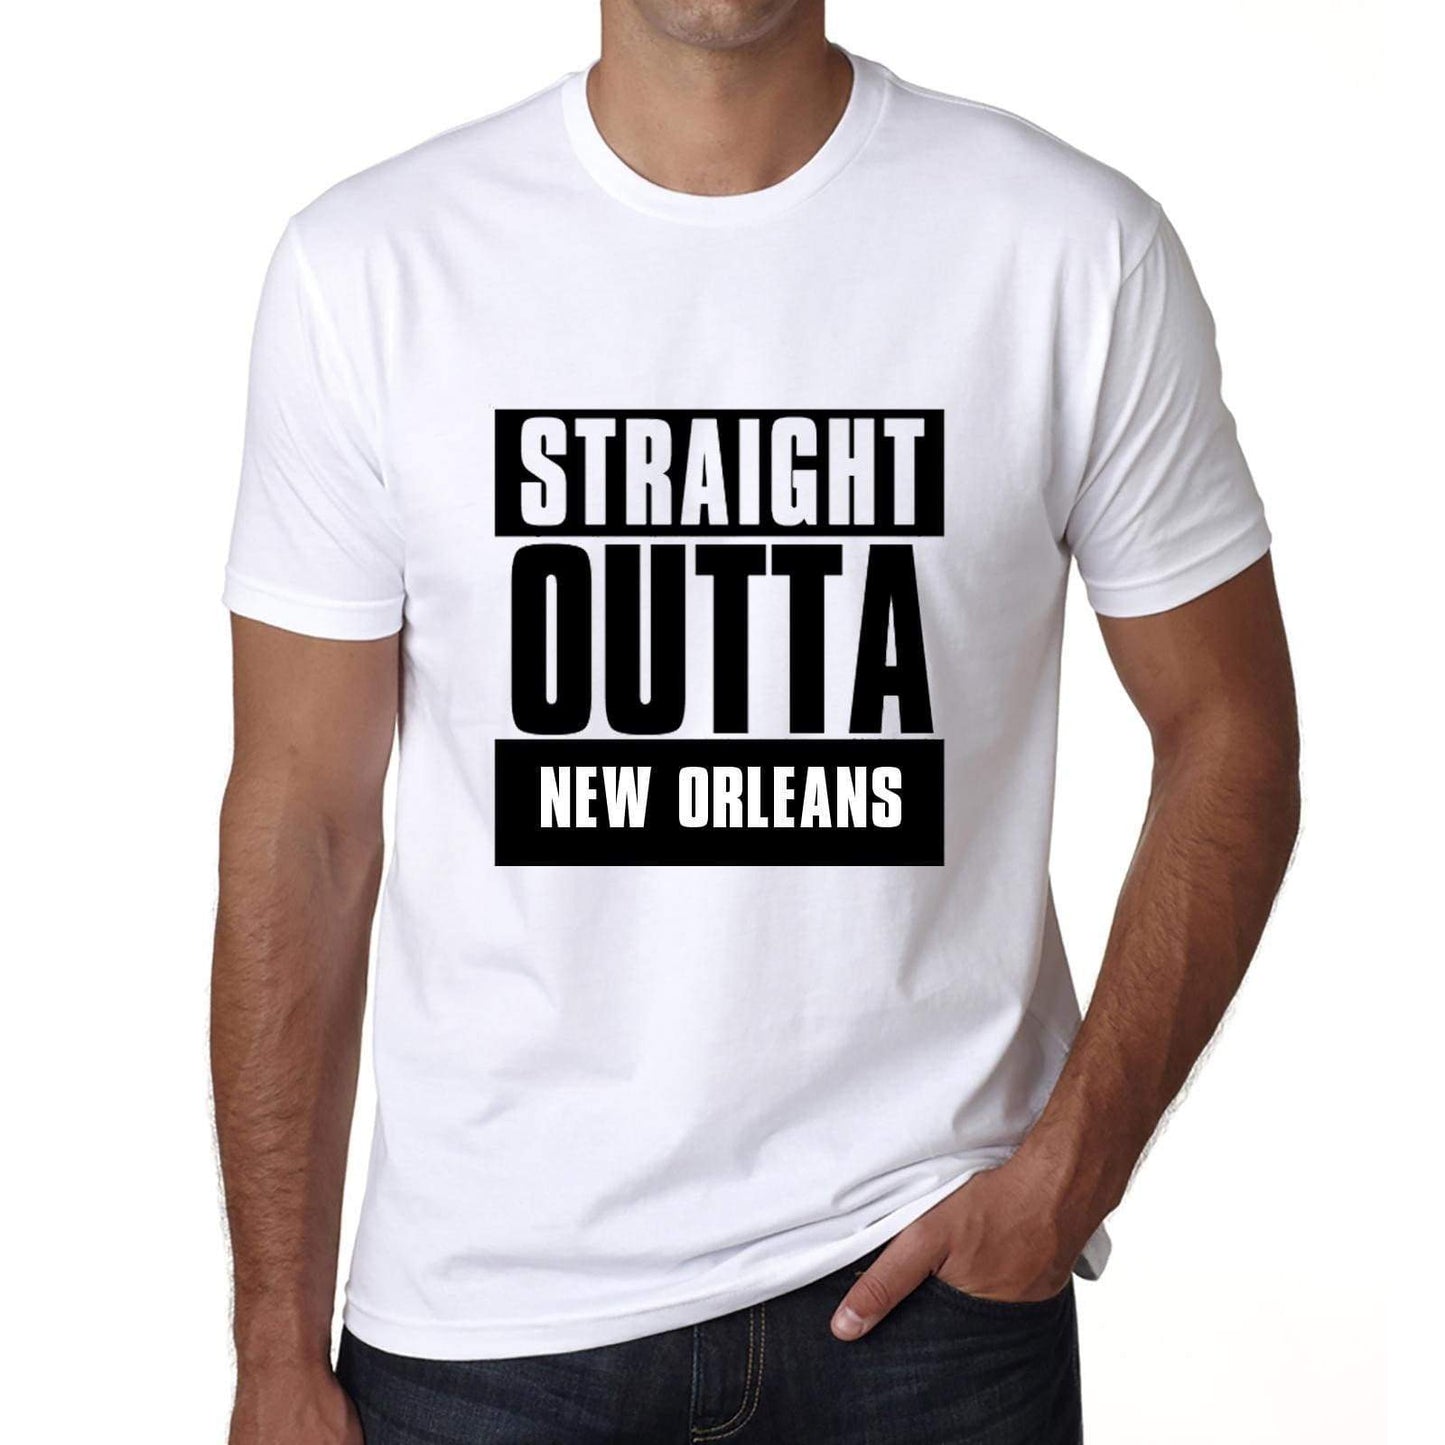 Straight Outta New Orleans Mens Short Sleeve Round Neck T-Shirt 00027 - White / S - Casual